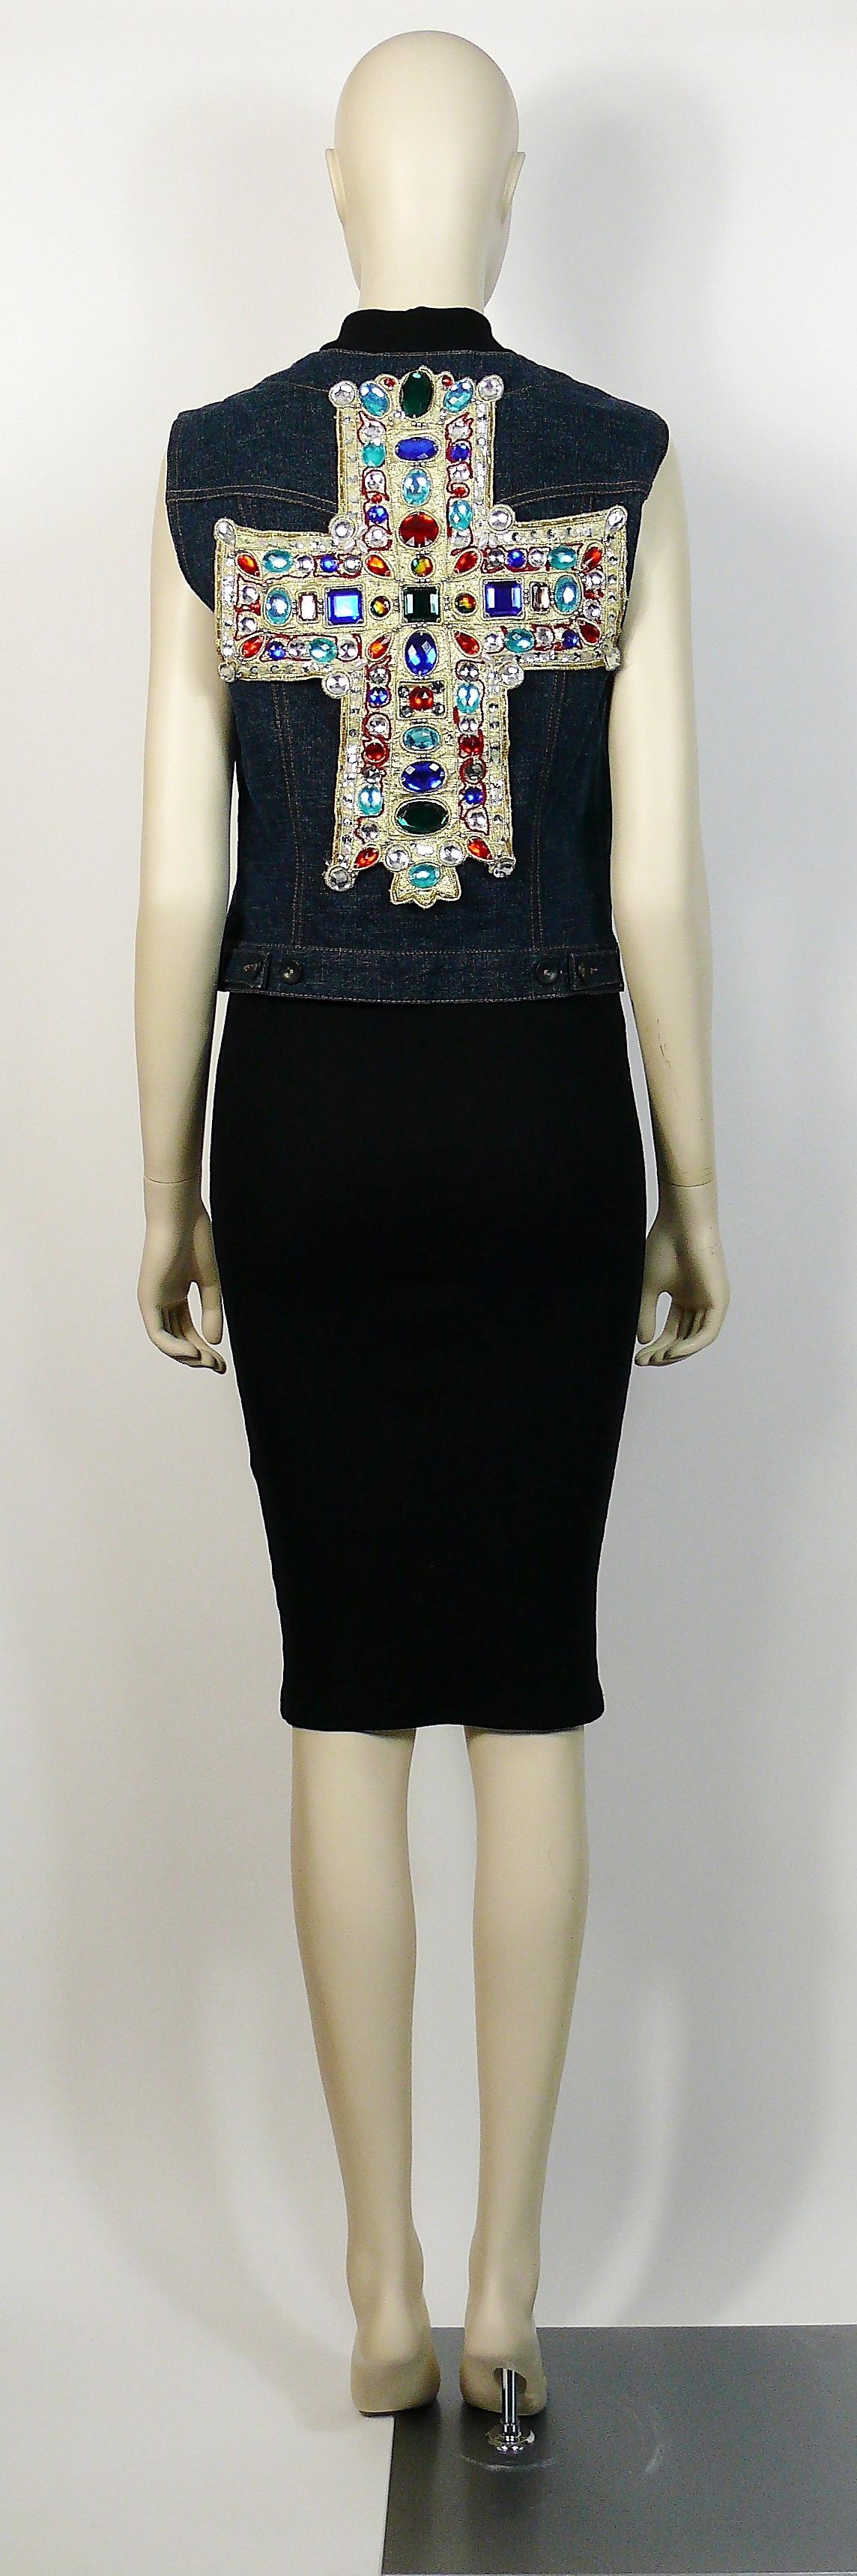 CHRISTIAN LACROIX vintage iconic denim vest enblazoned on the back by a Medieval inspired gold cross embellished with multicolored resin stones in varying shapes and sizes, faux pearls and sequins.

The cross is removable.

Label reads 15 CHRISTIAN